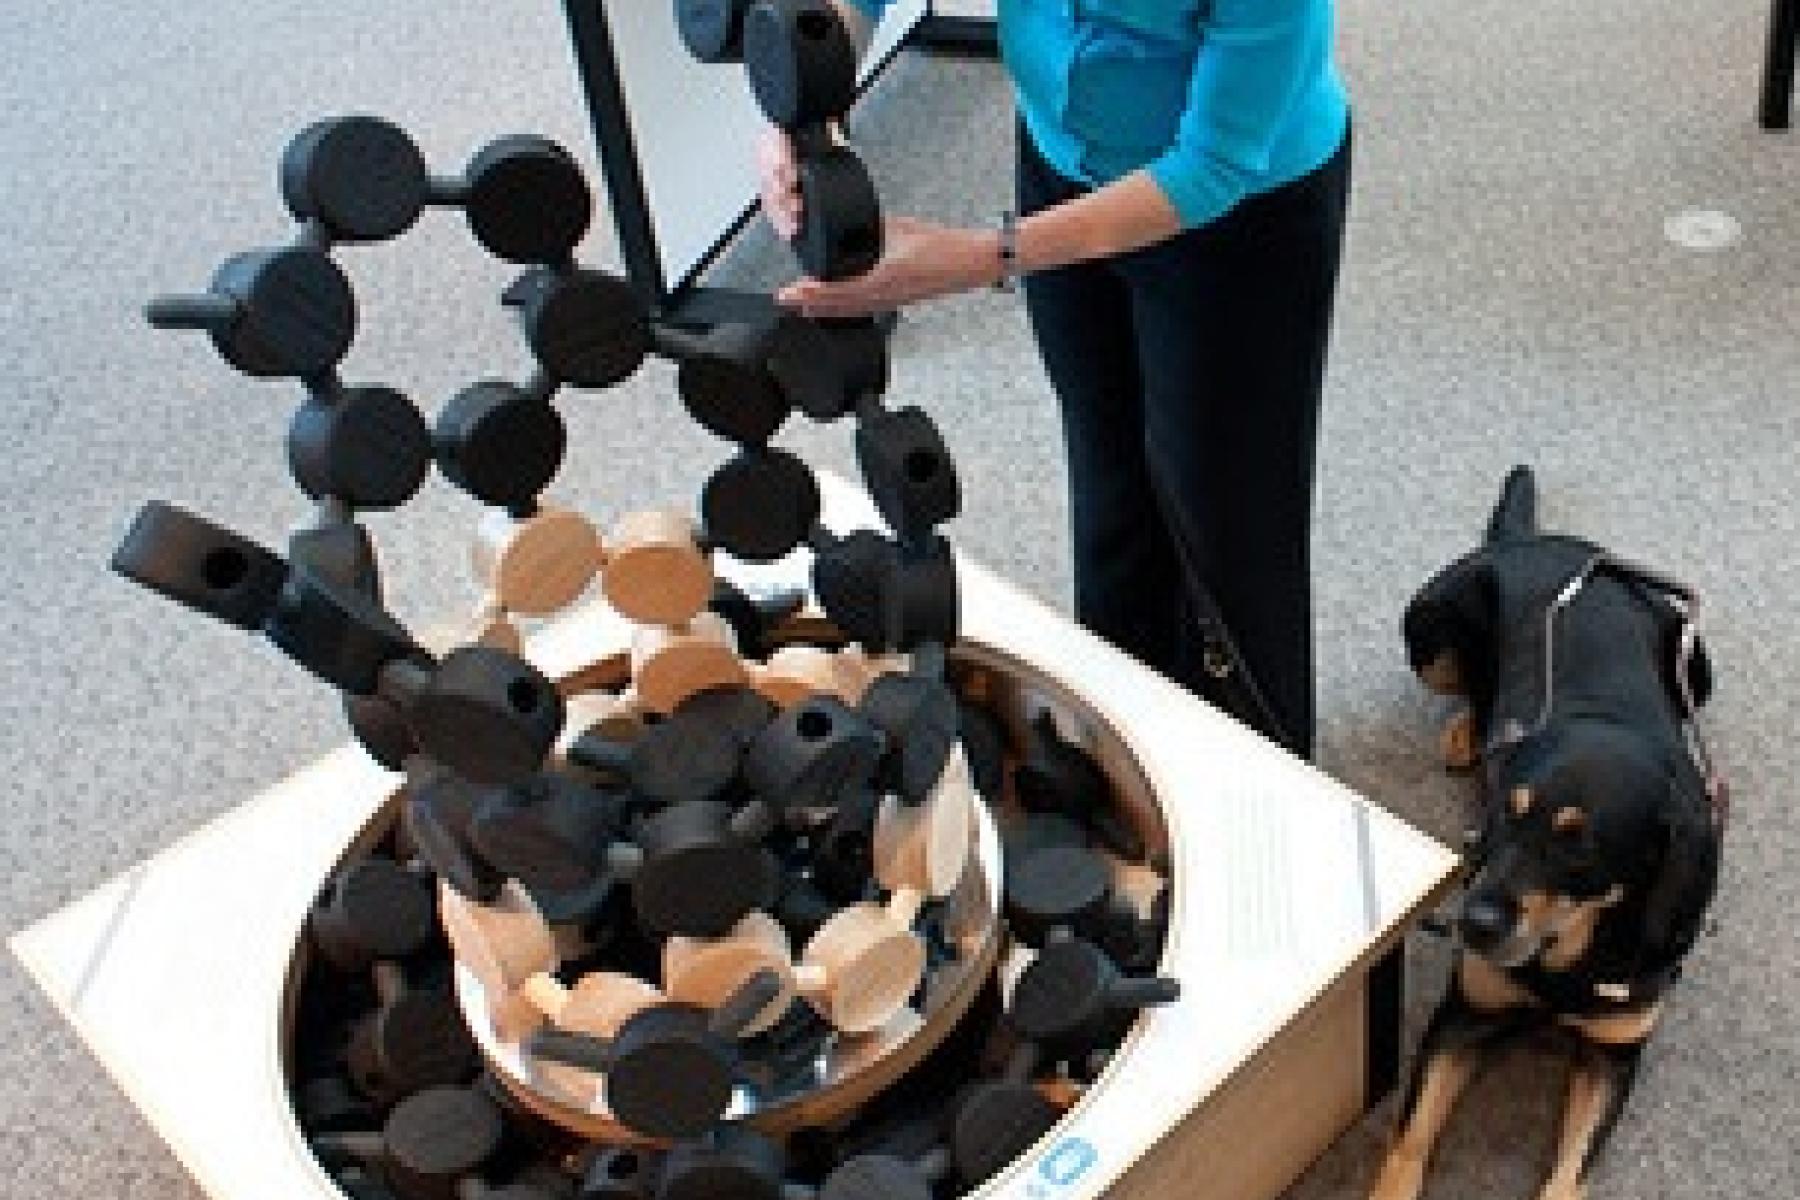 Adult visitor engaging with Carbon Nano-Tube puzzle exhibit component